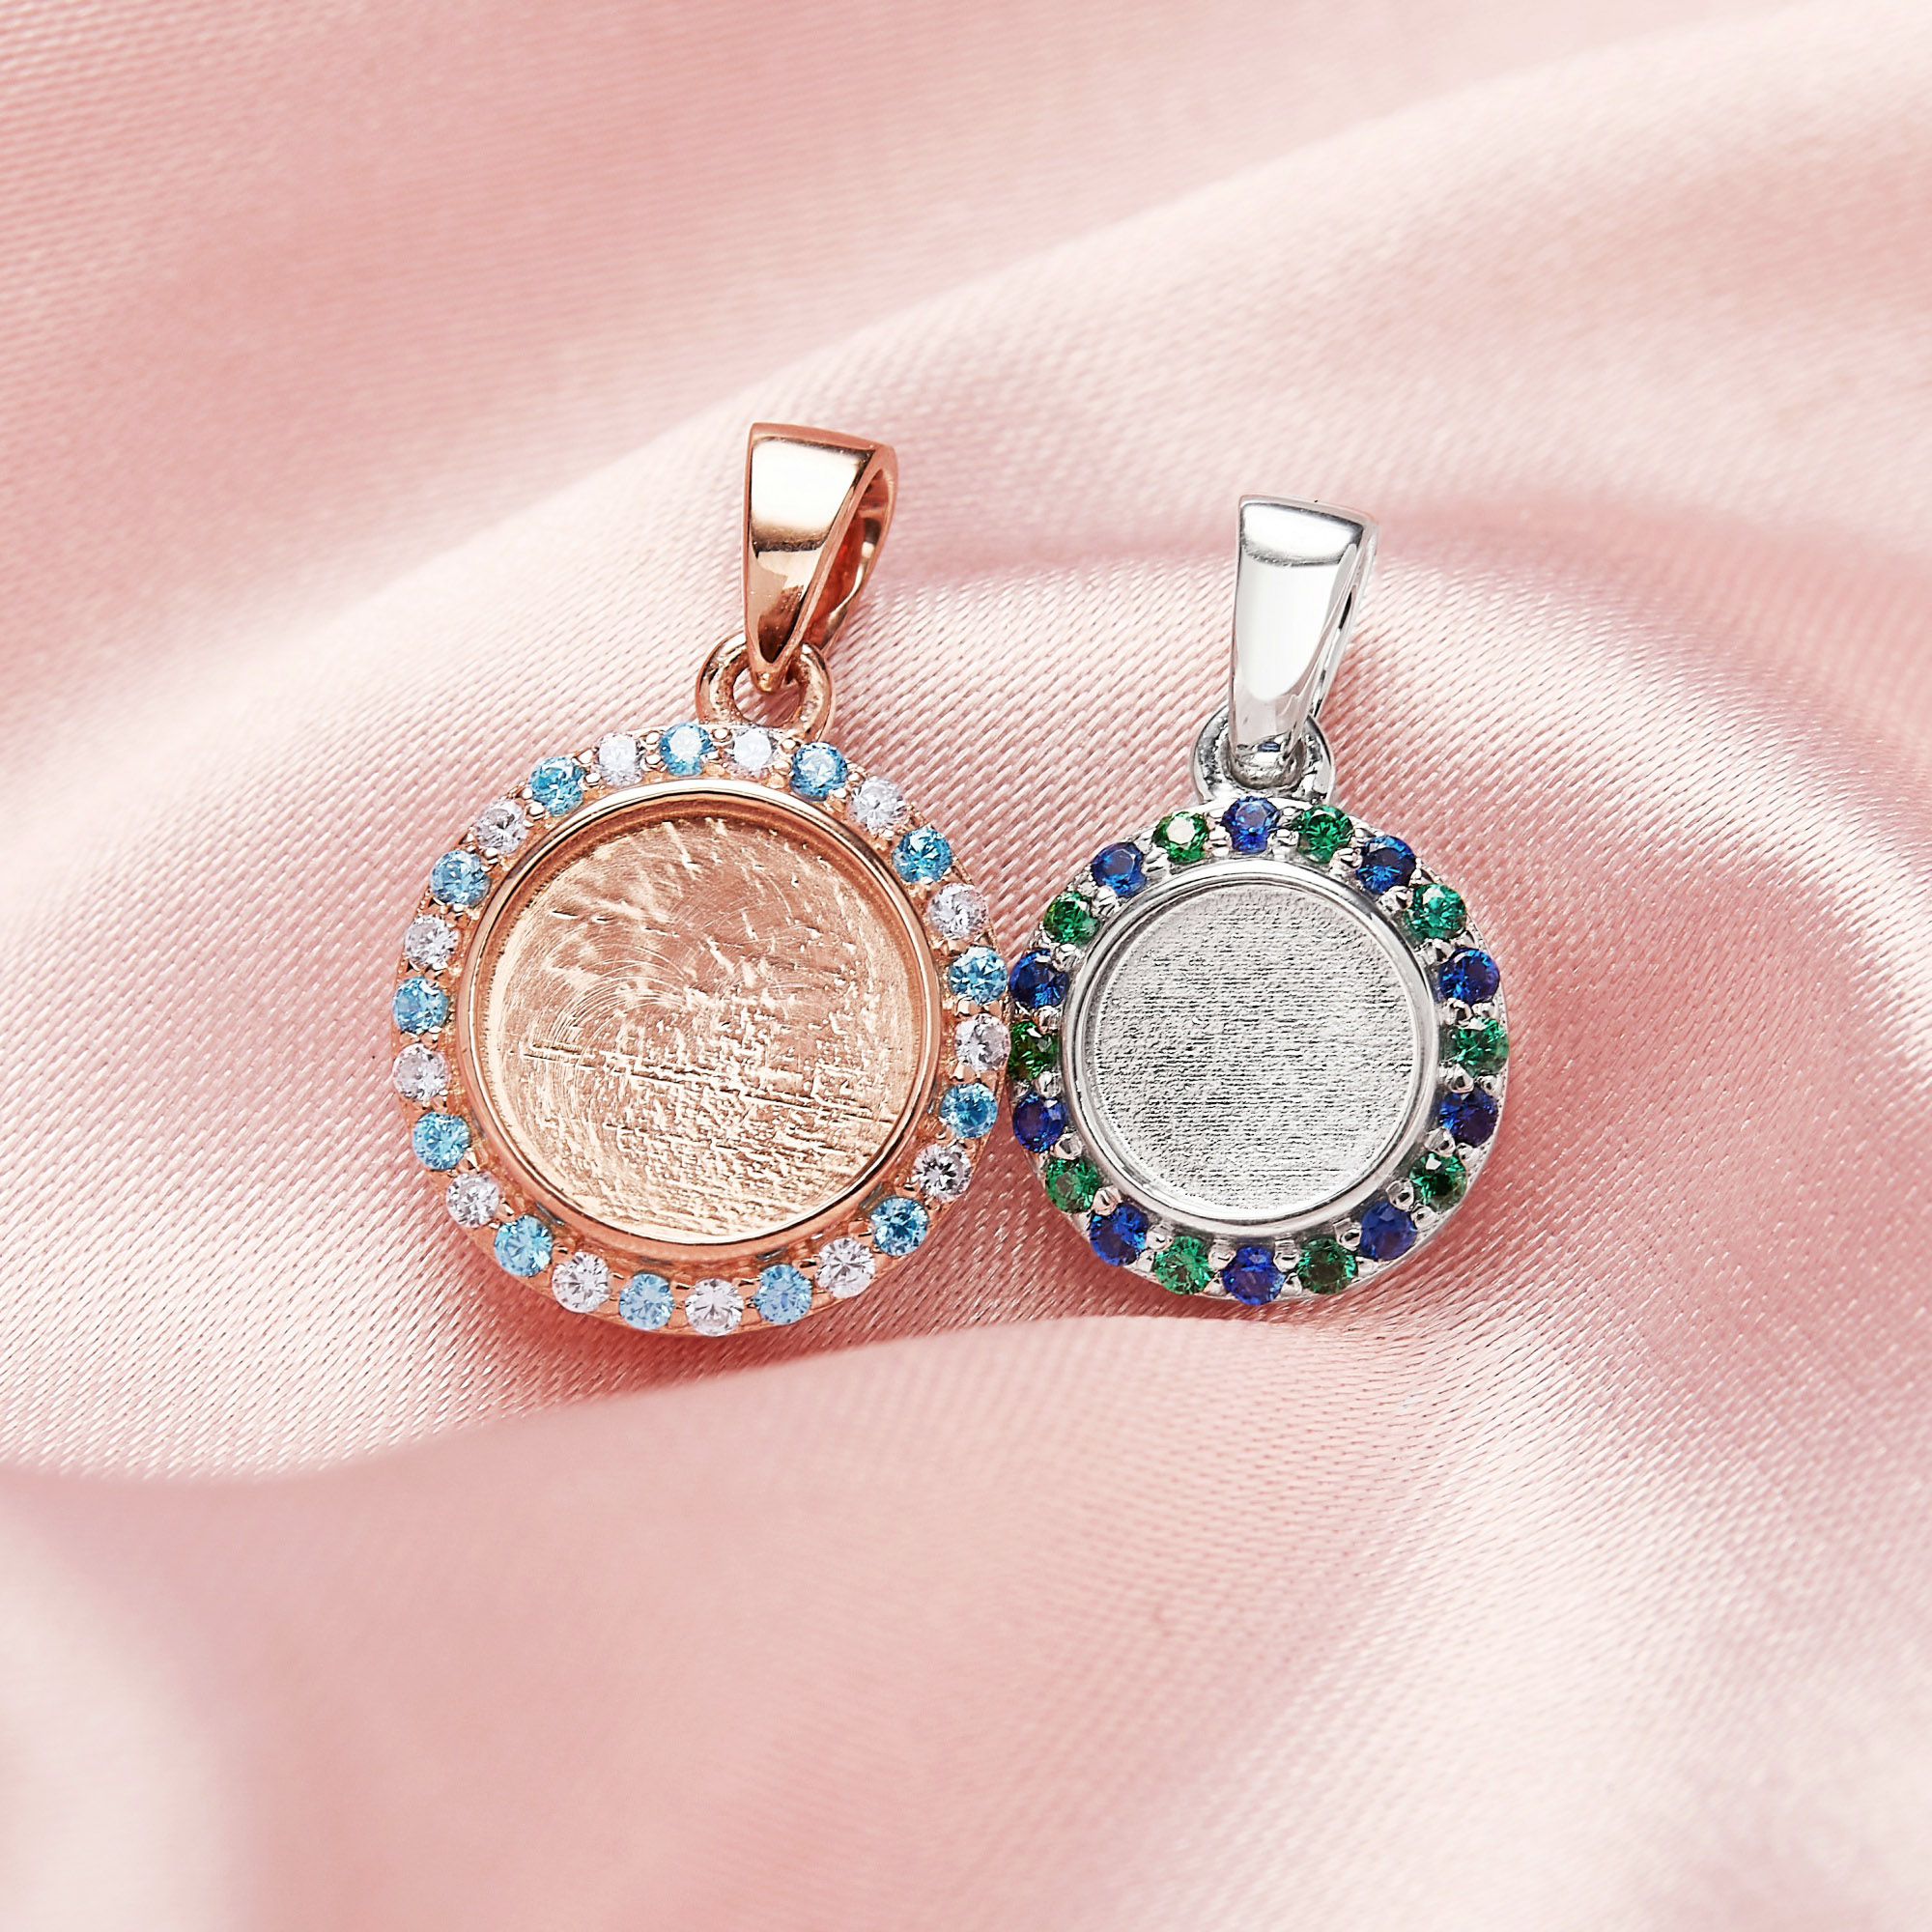 Keepsake Breast Milk Resin Round Pendant Bezel Settings,Solid Back 925 Sterling Silver Rose Gold Plated Pendant,Pave CZ Stone Charm,DIY Pendant Supplies 1431251 - Click Image to Close